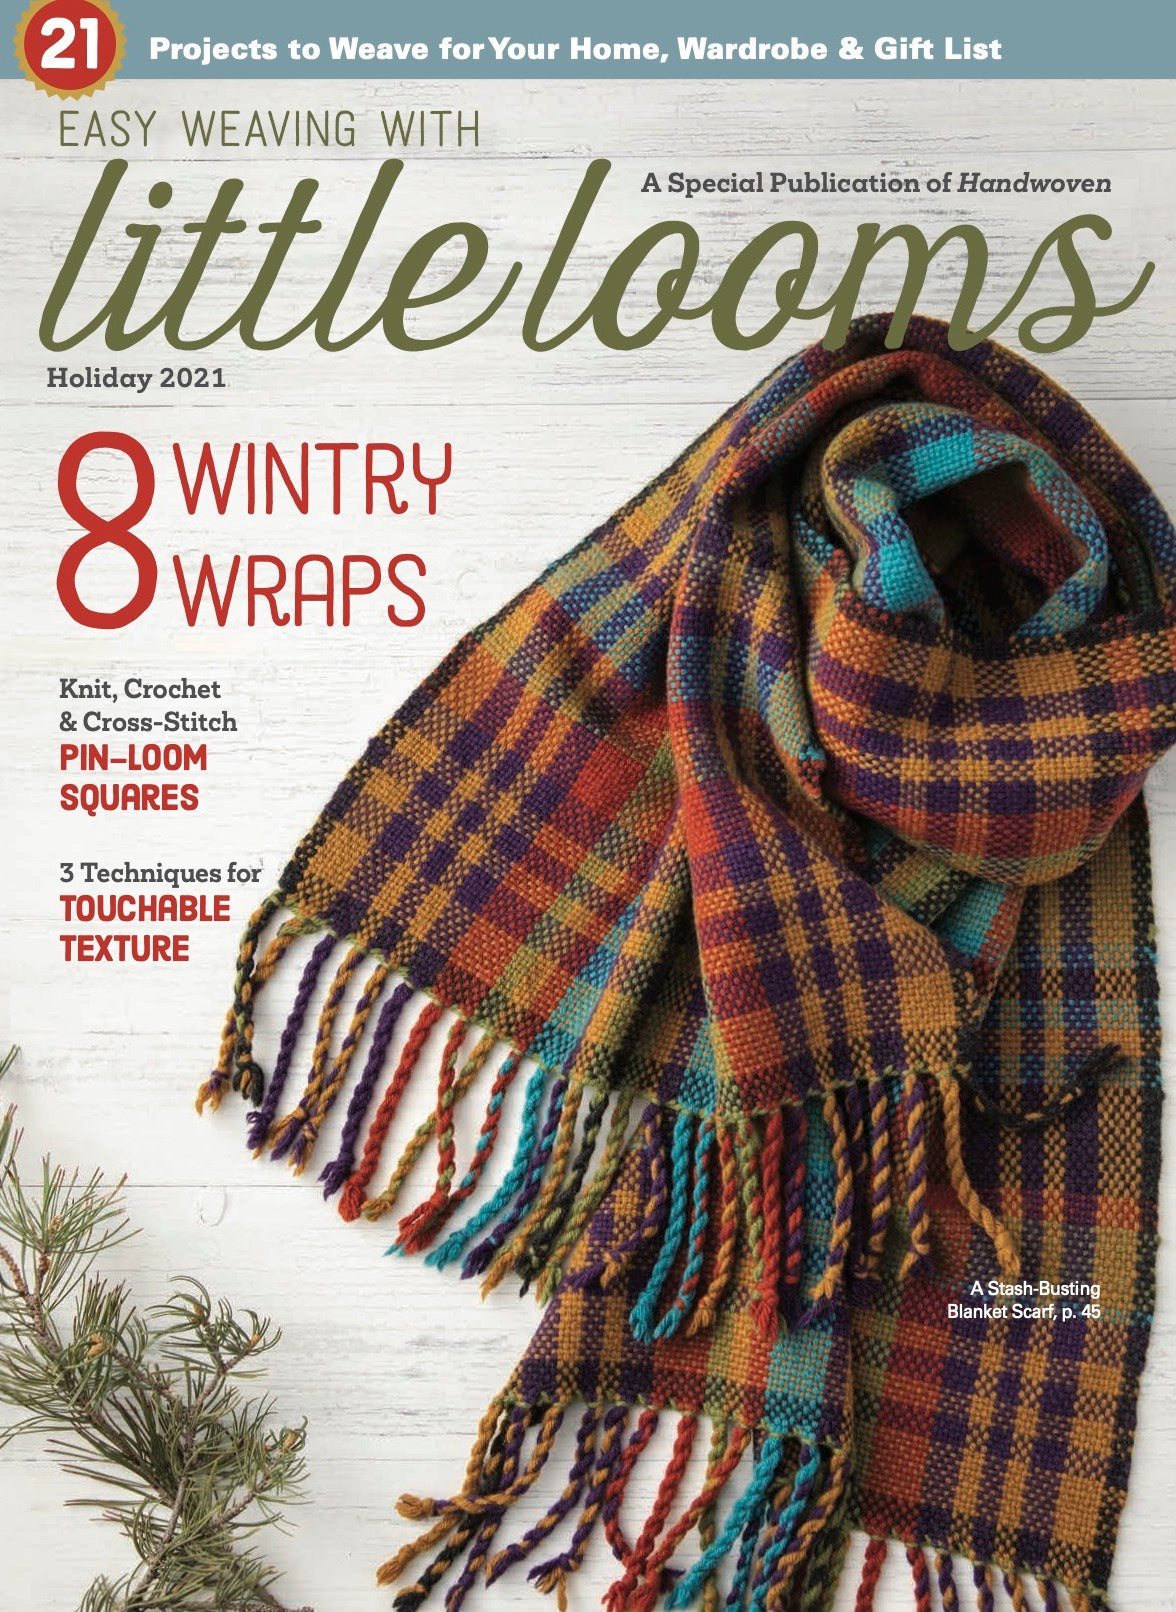 Easy Weaving with Little Looms Holiday 2021